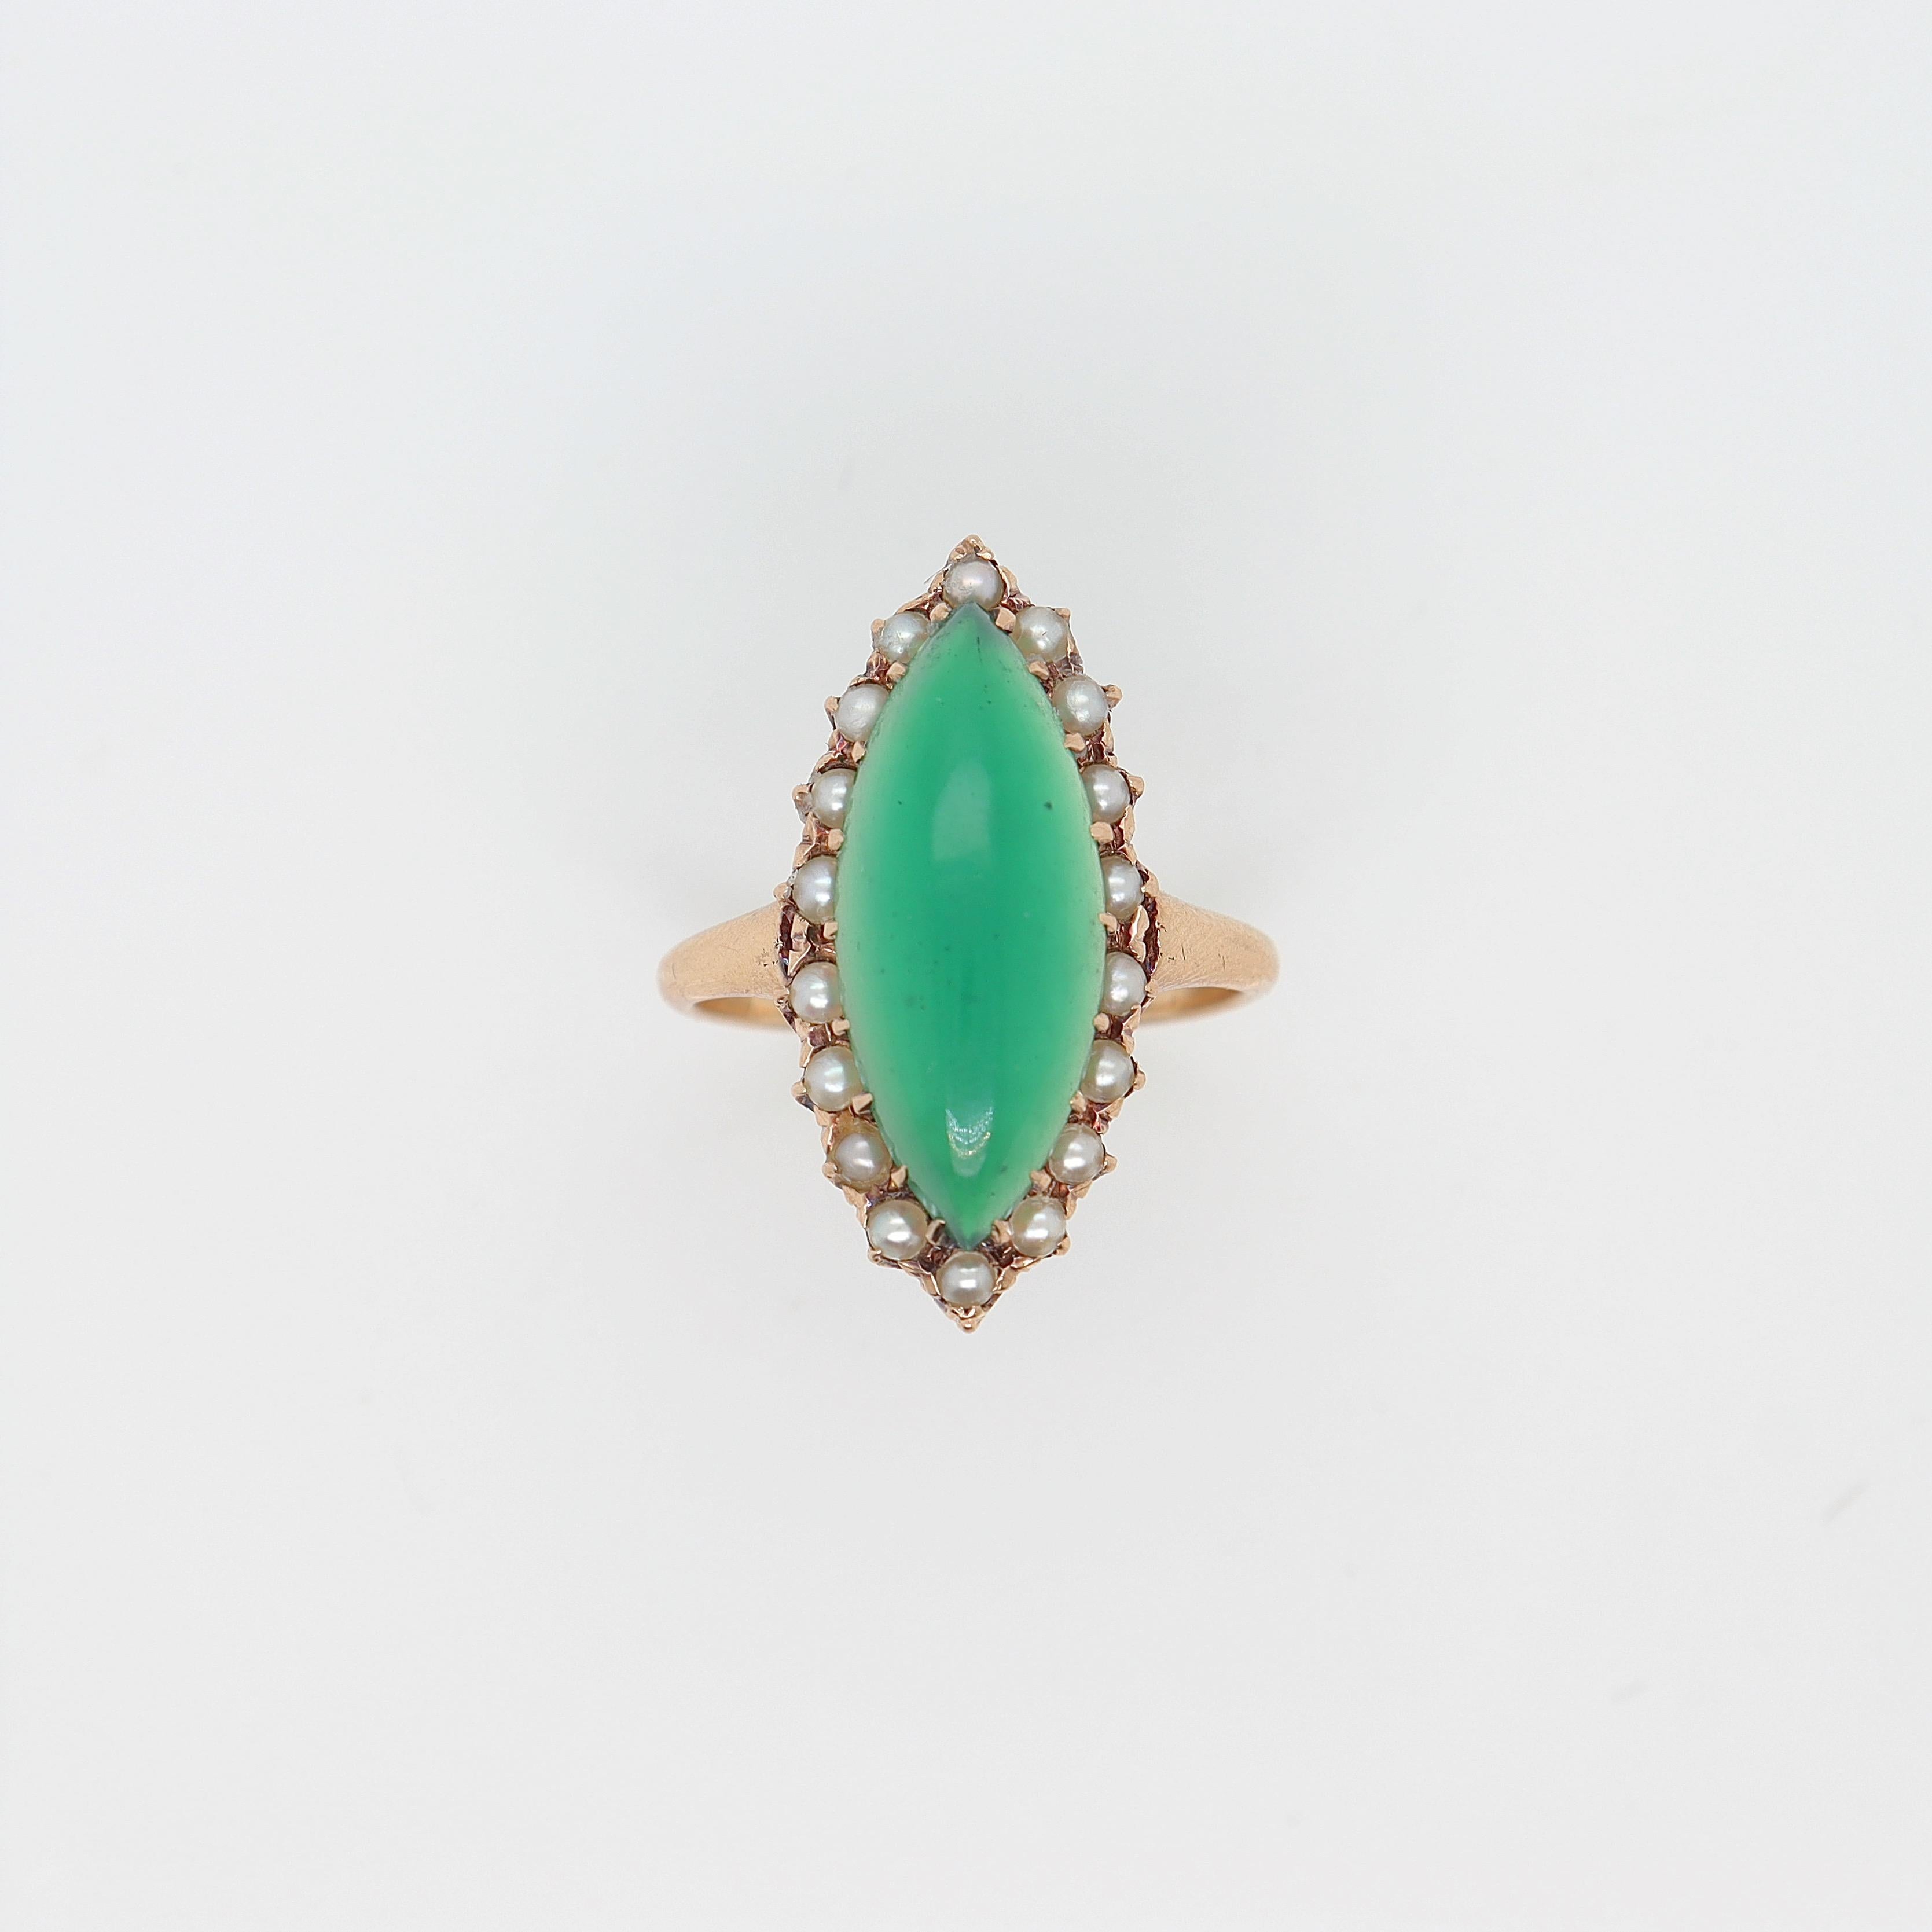 A fine antique gold, chrysoprase, and seed pearl ring.

In 14K gold.

With a navette shaped chrysoprase cabochon high set above a halo of small prong set seed pearls.

Simply a wonderful ring!

Date:
Early to Mid 20th Century

Overall Condition:
It